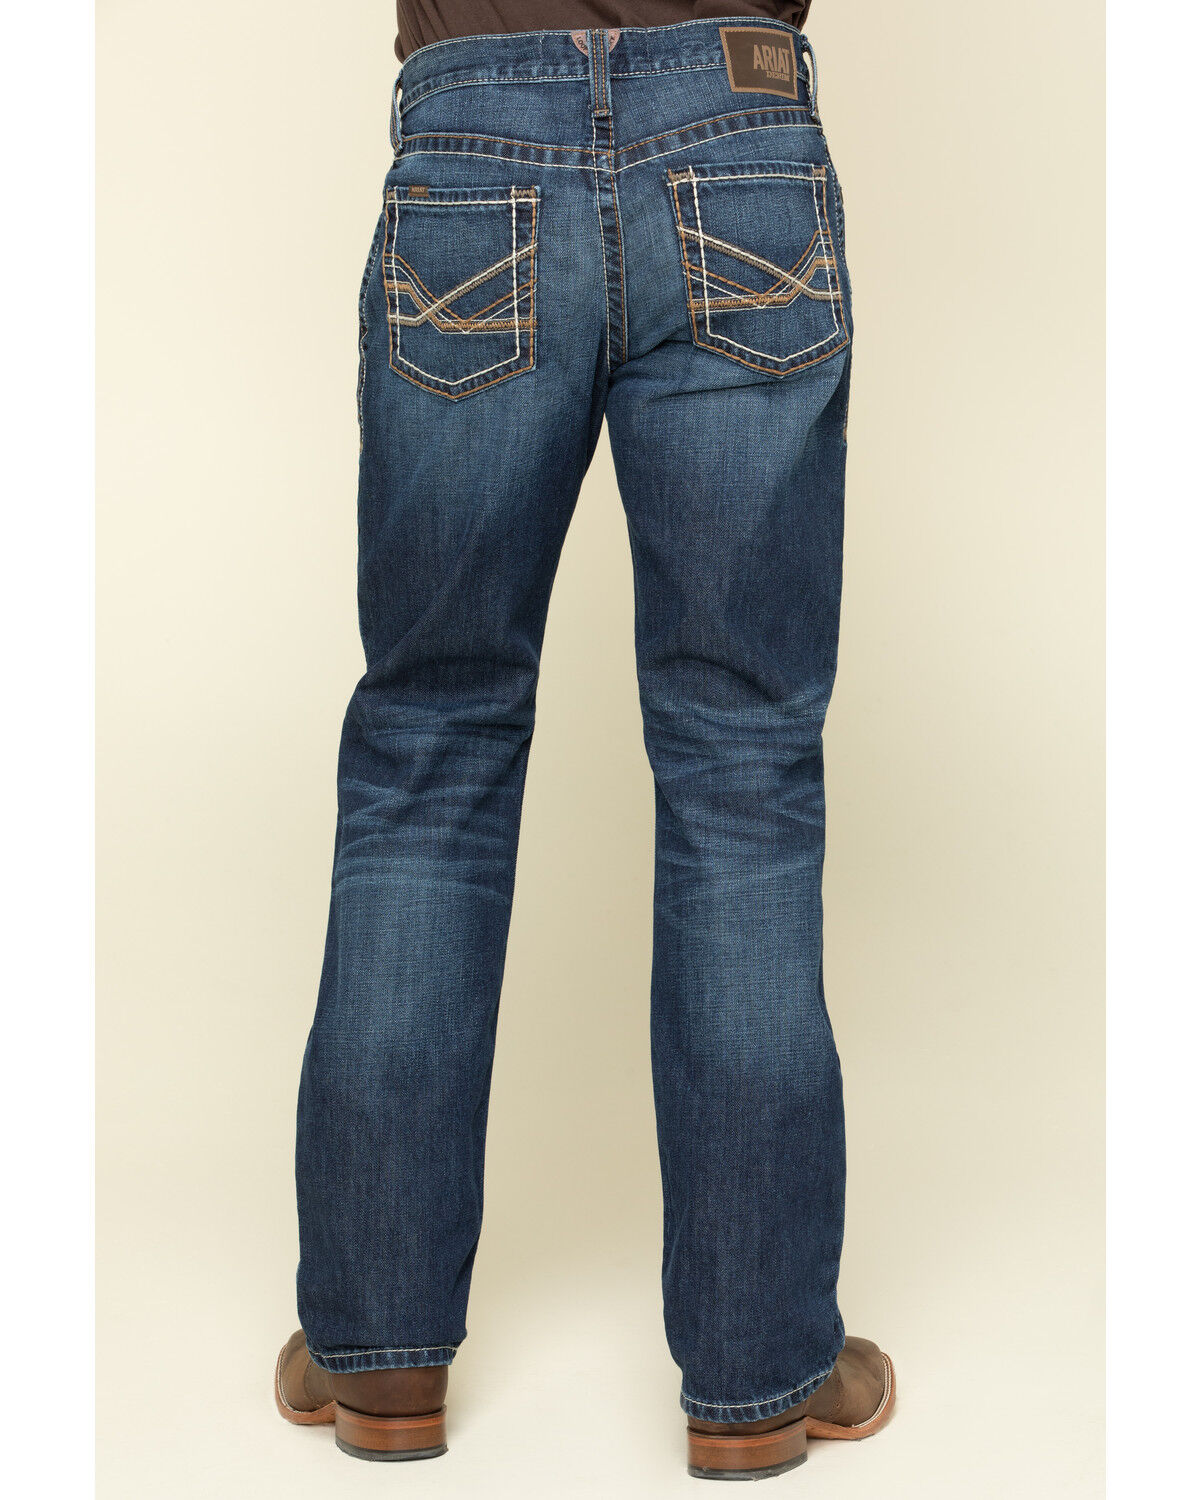 Jeans ARIAT Mens Denim Jeans M4 Scoundrel Relaxed Fit Big and Tall Med ...